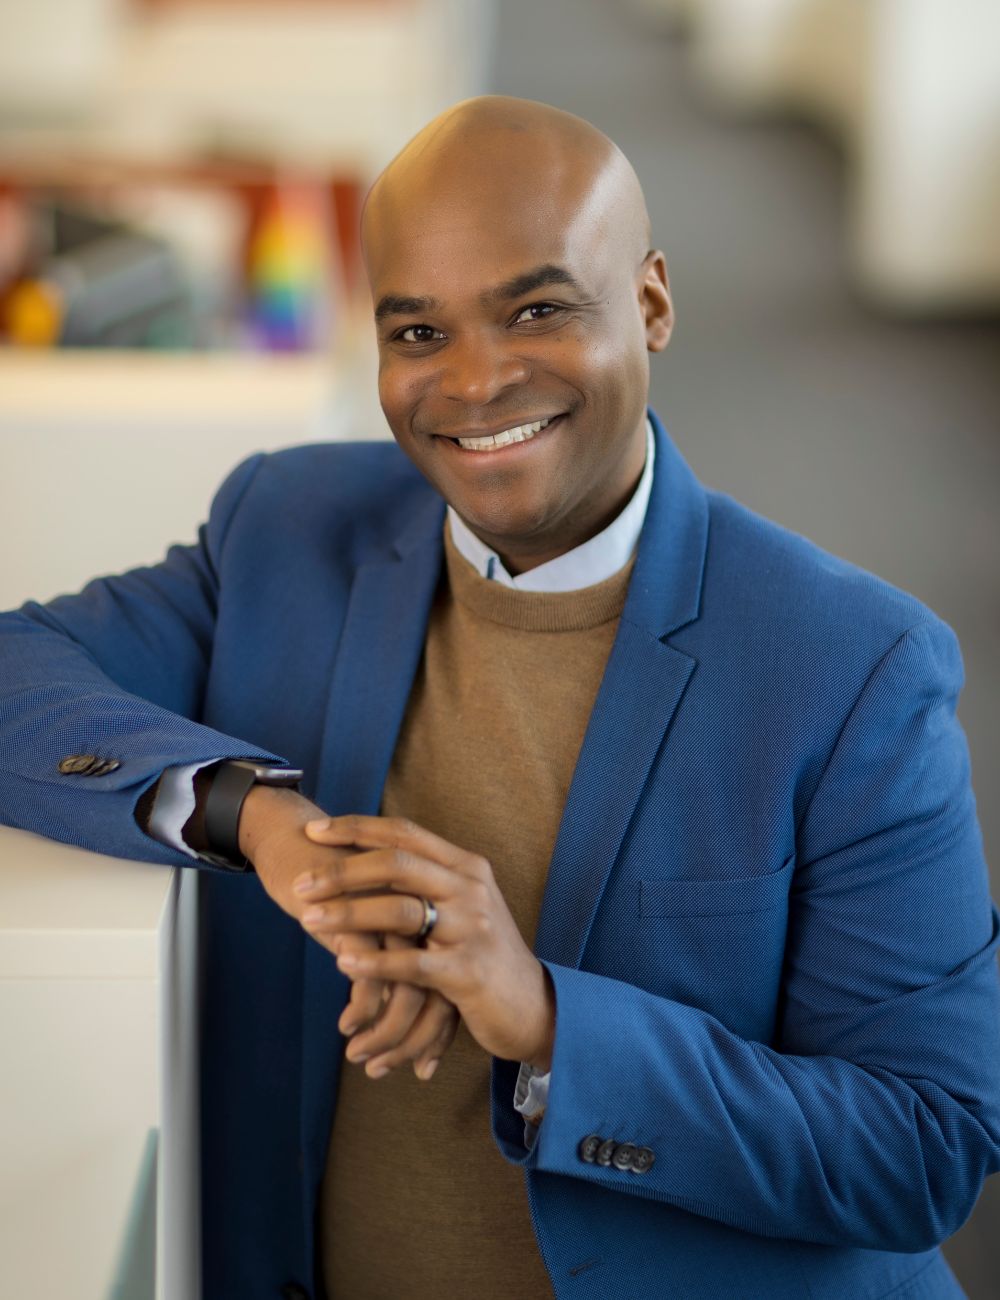 Headshot of a smiling person of medium dark skin tone, who is bald and wearing a brown sweater under a blue suit jacket, with hands crossed and leaning against a cubicle.